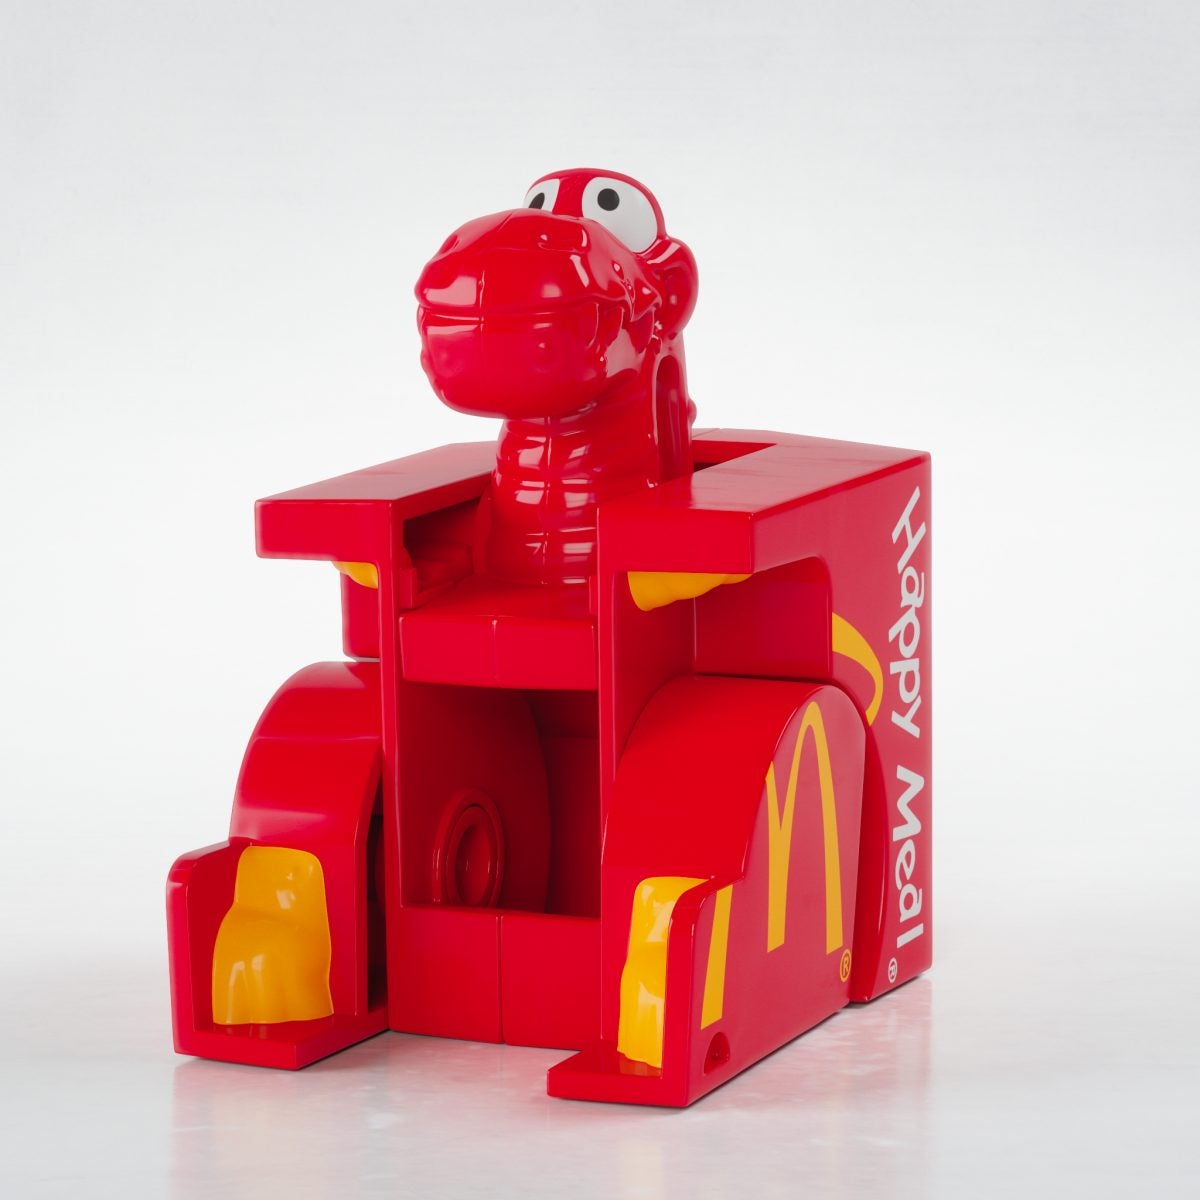 Iconic McDonald's Happy Meal Toys From Our Childhood Available From Nov 28 & We're Feeling Nostalgic - WORLD OF BUZZ 8